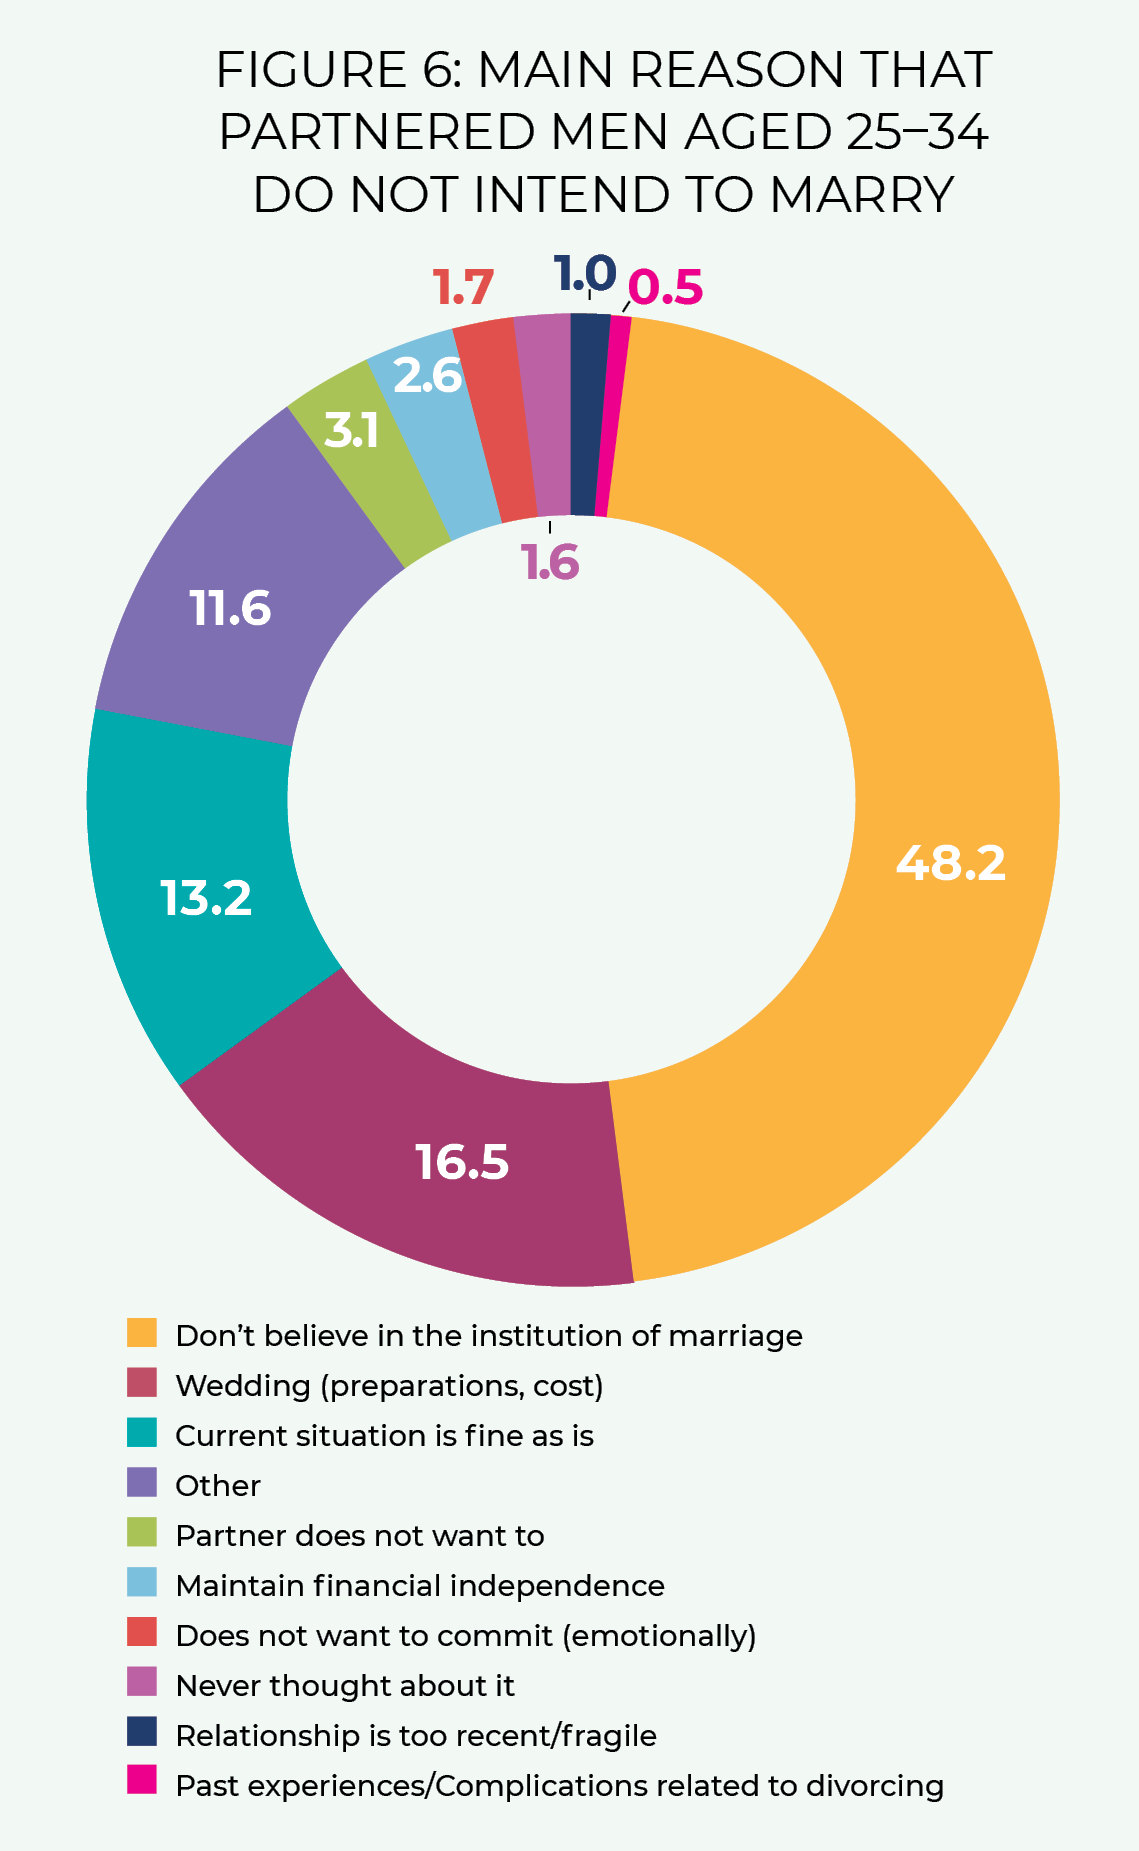 FIGURE 6: MAIN REASON THAT PARTNERED MEN AGED 25–34 DO NOT INTEND TO MARRY